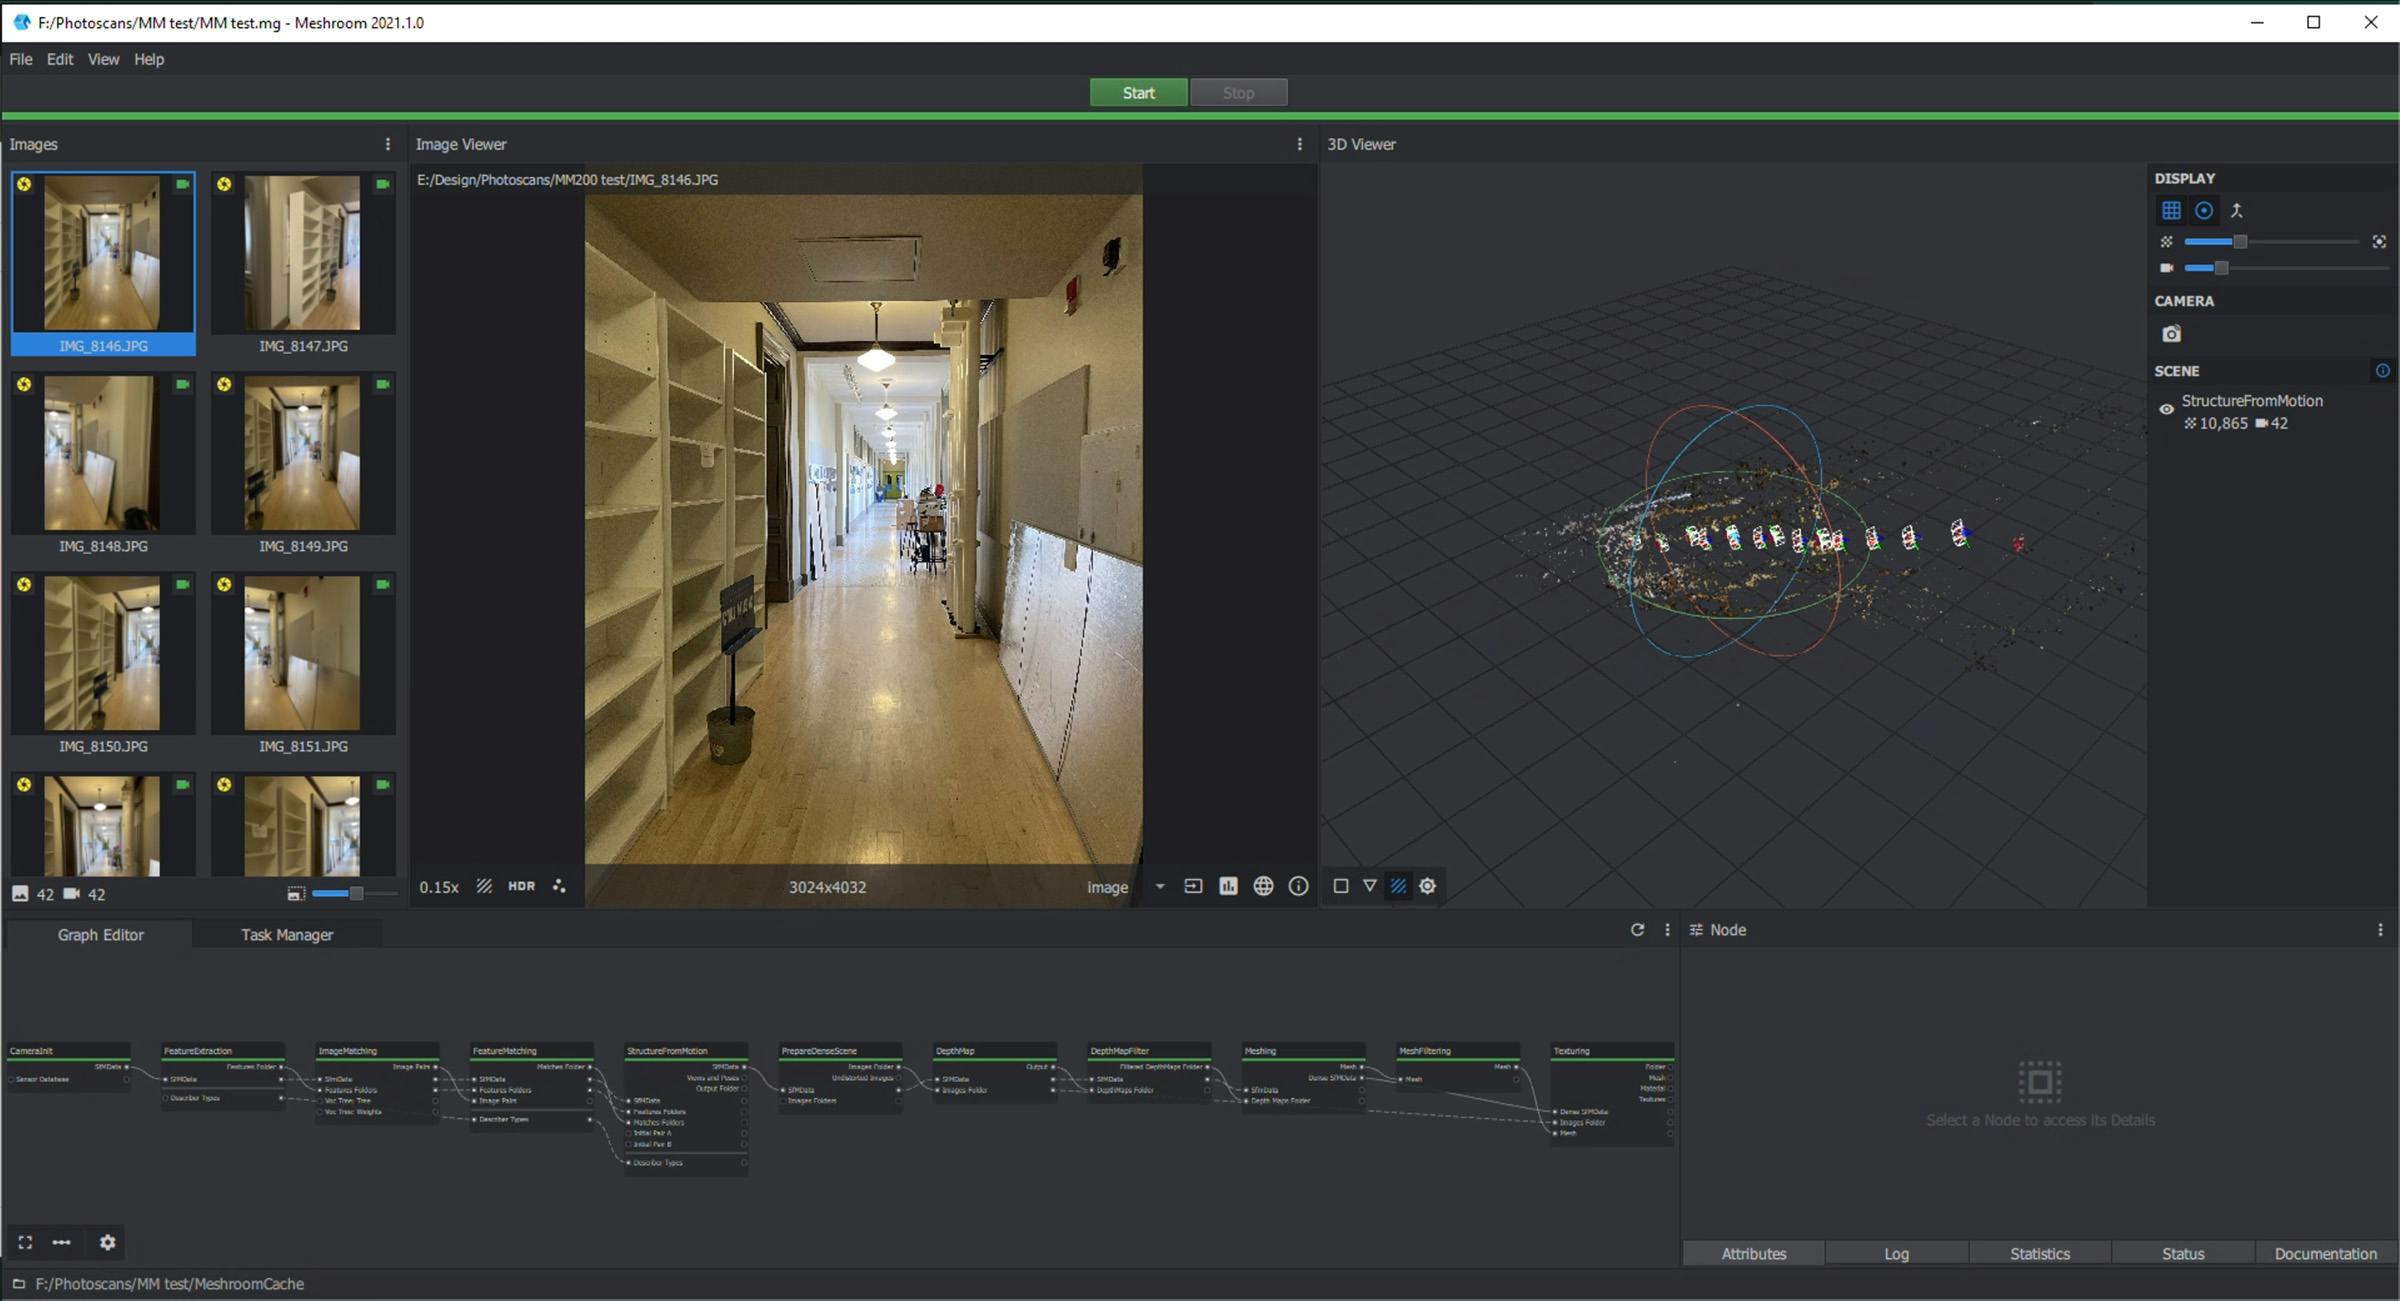 AliceVision being used to generate a point cloud of the hallway from reference images.